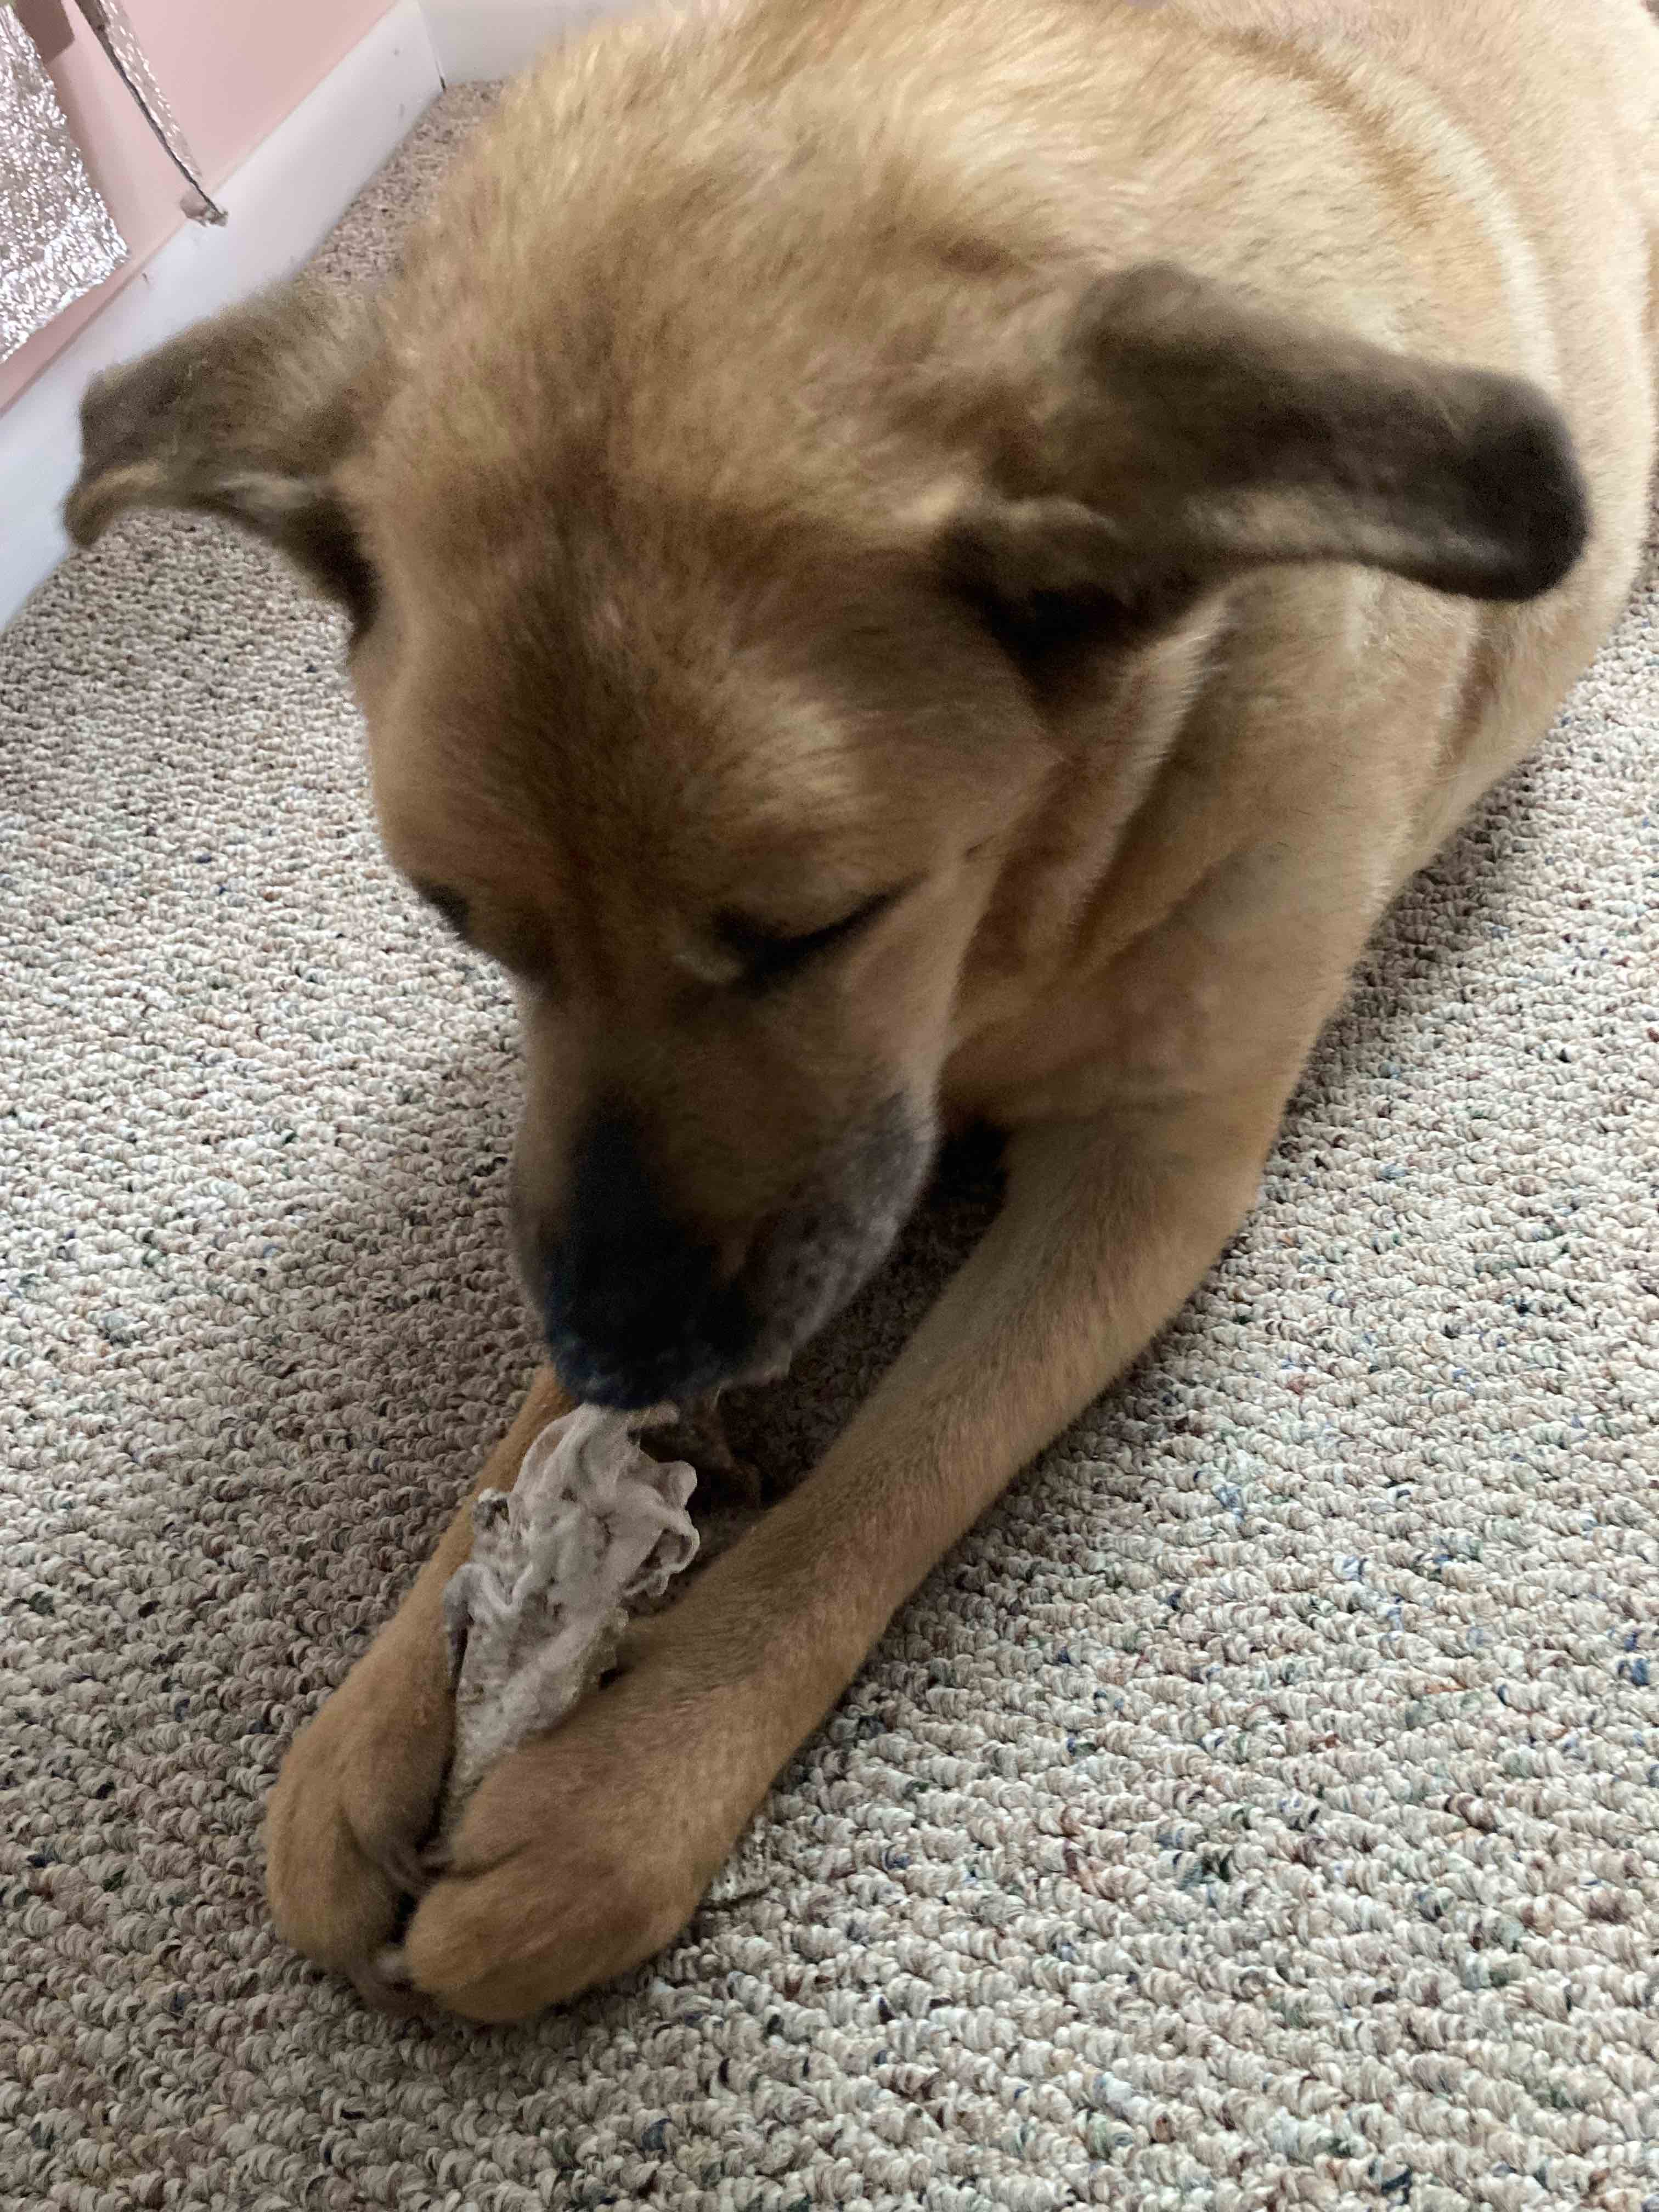 Yellow dog chewing a rawhide